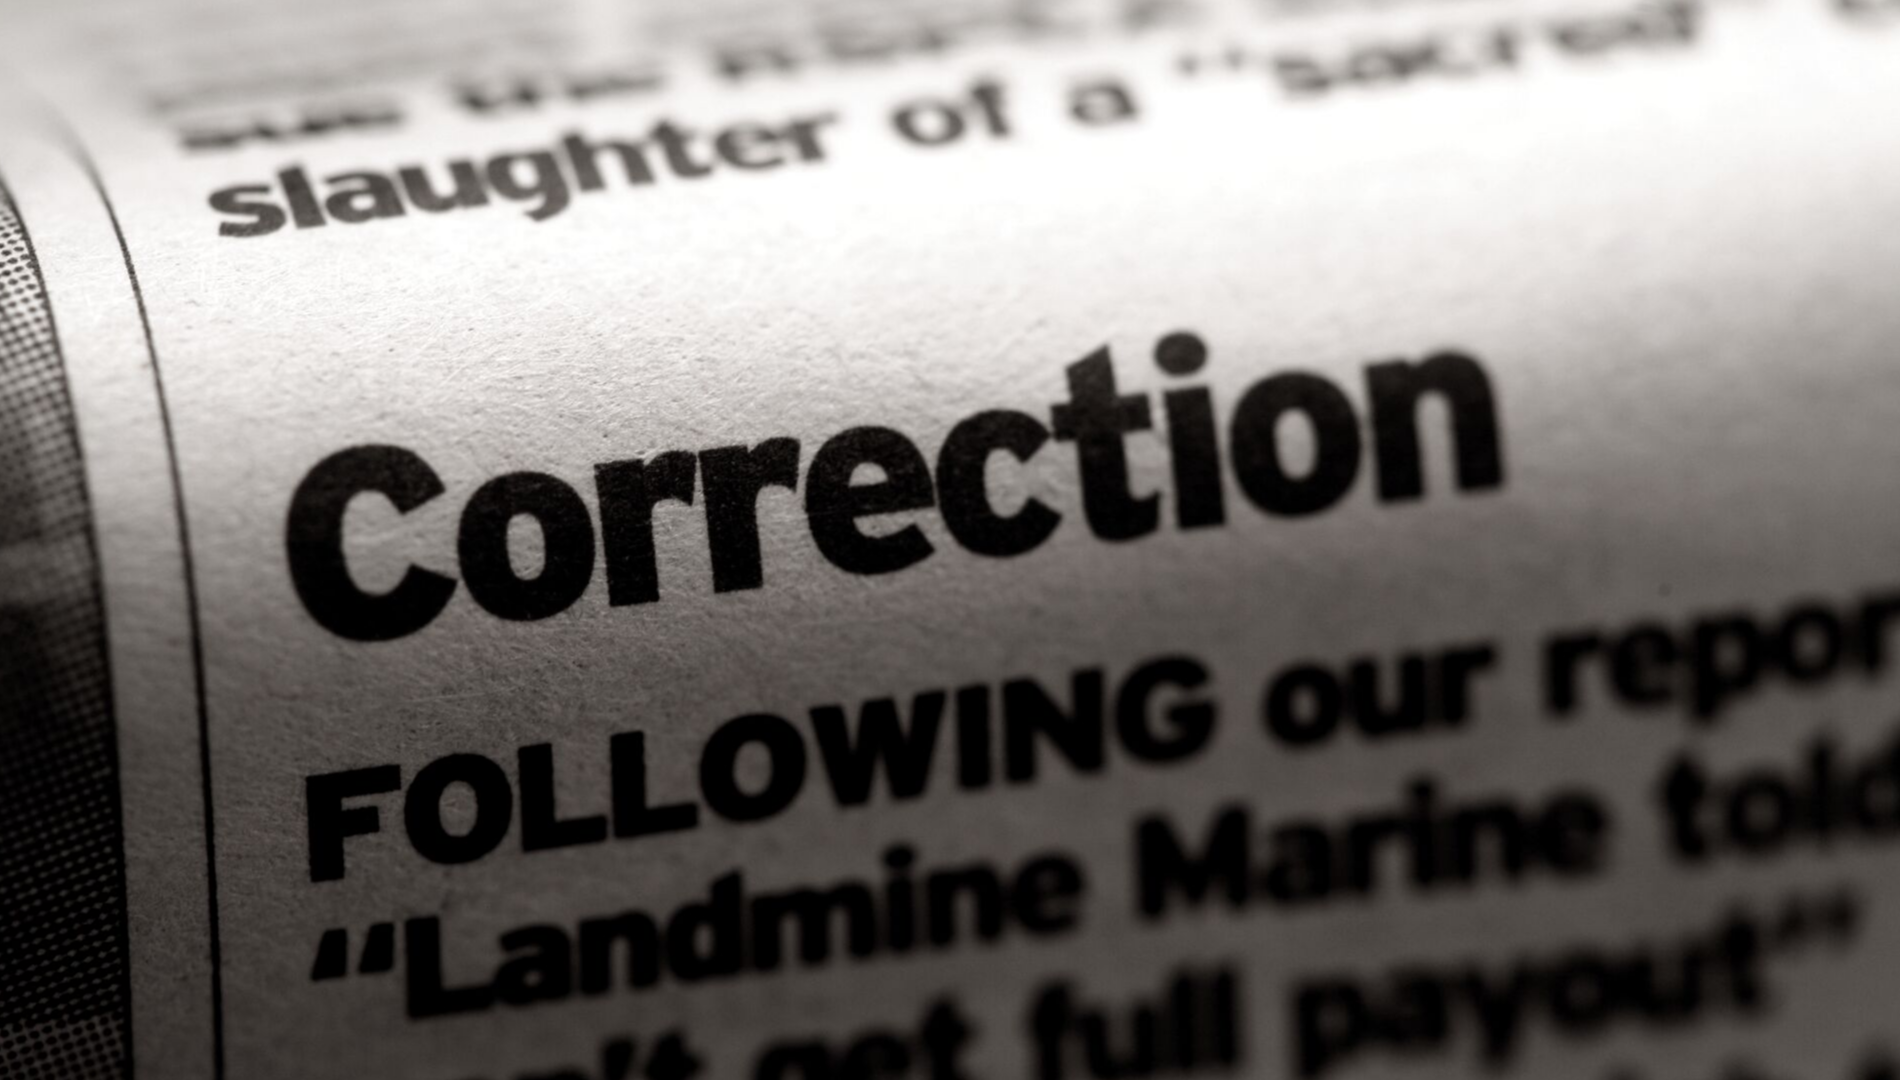 Bringing news corrections further into the Digital Age: a new project